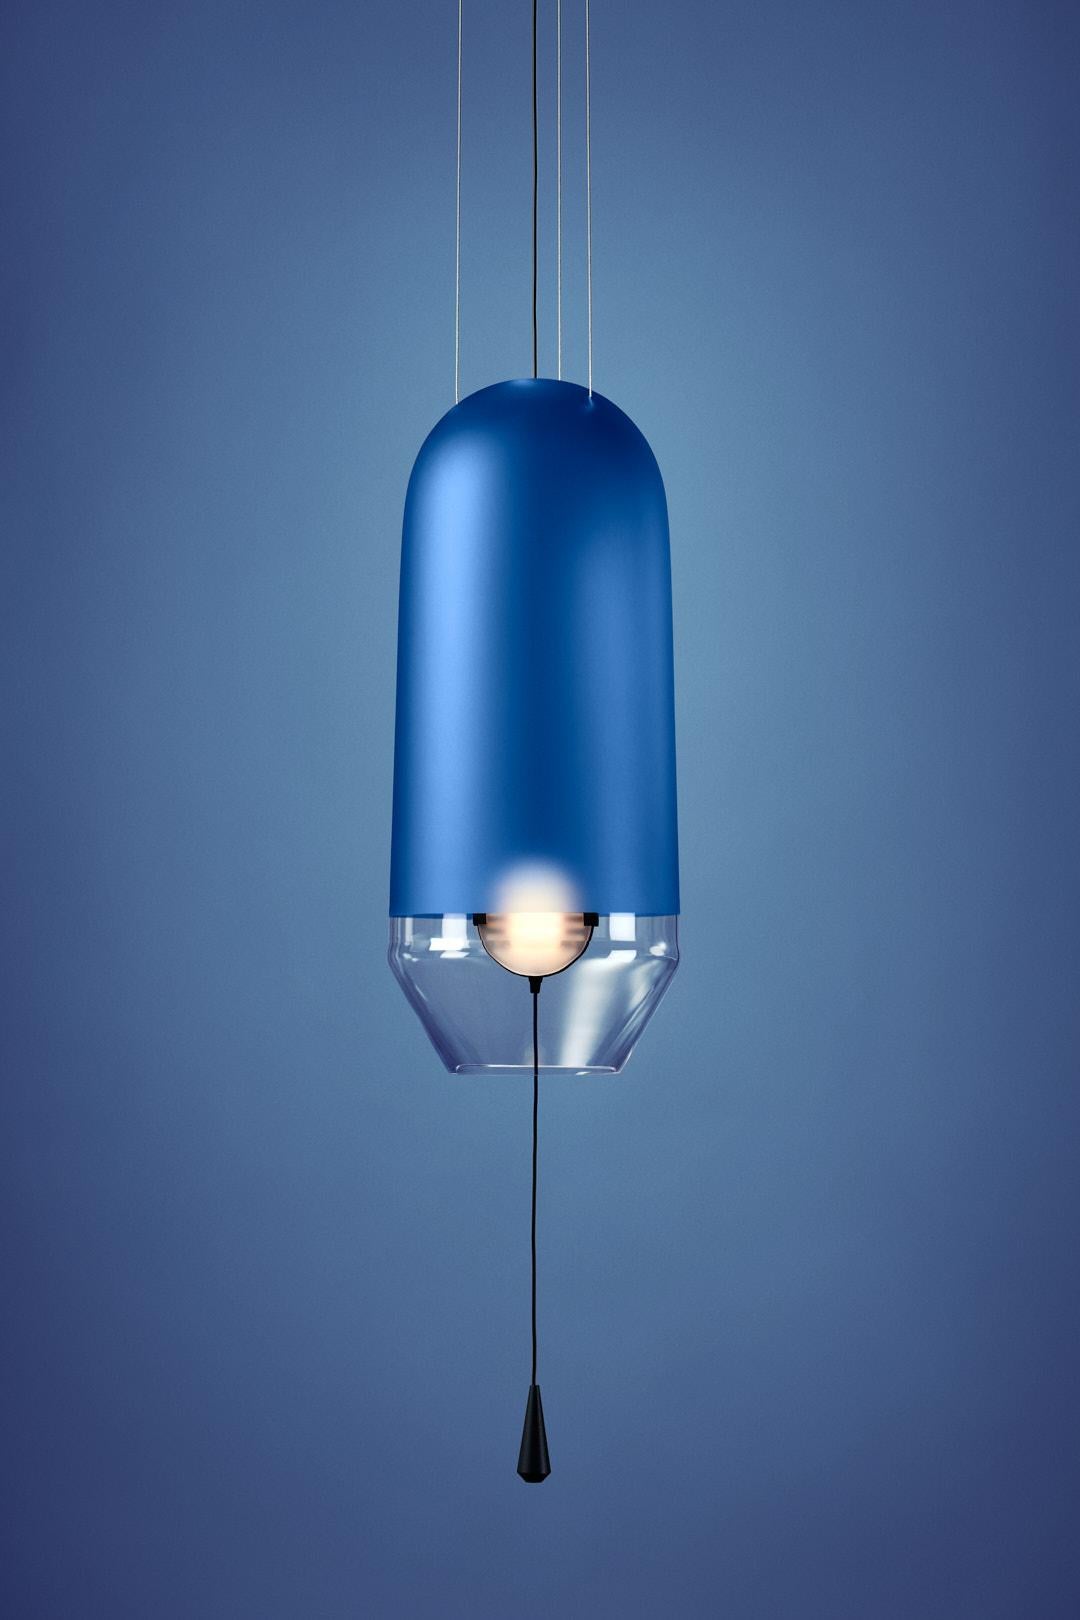 To order the Full-swing version please check our storefront.

“Limpid Light” is a pendant light, decorative light made in Europe.
This collection comes with color customisation. We are able to develop specific colours that fit your interior in